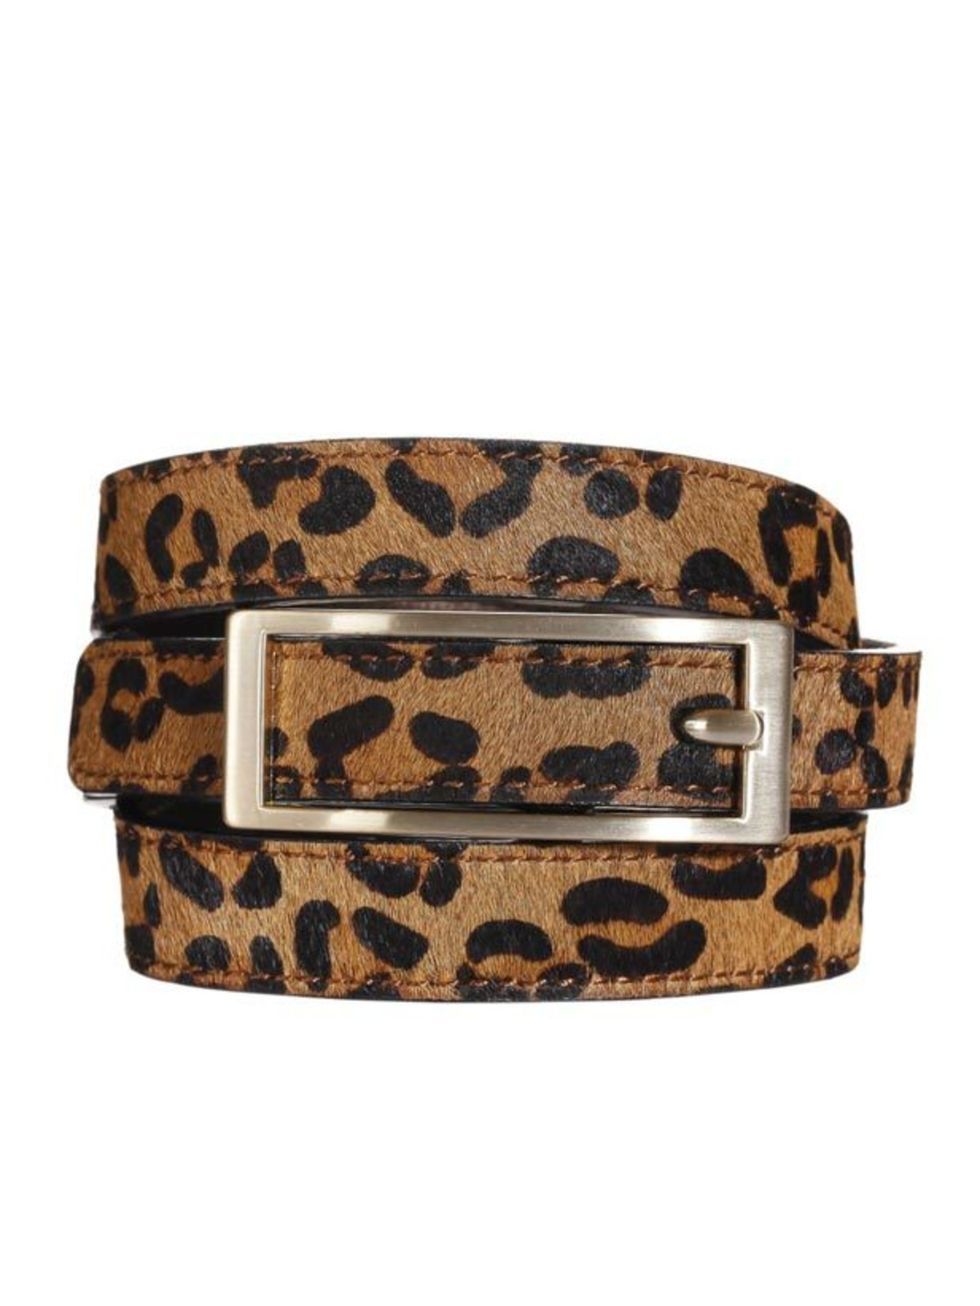 <p>Theres an abundance of leopard print in stores right now so add some animal magnetism to pretty much everything with the help of this cute belt <a href="http://bananarepublic.gap.eu/browse/product.do?cid=57623&amp;vid=1&amp;pid=000855879">Banana Repu